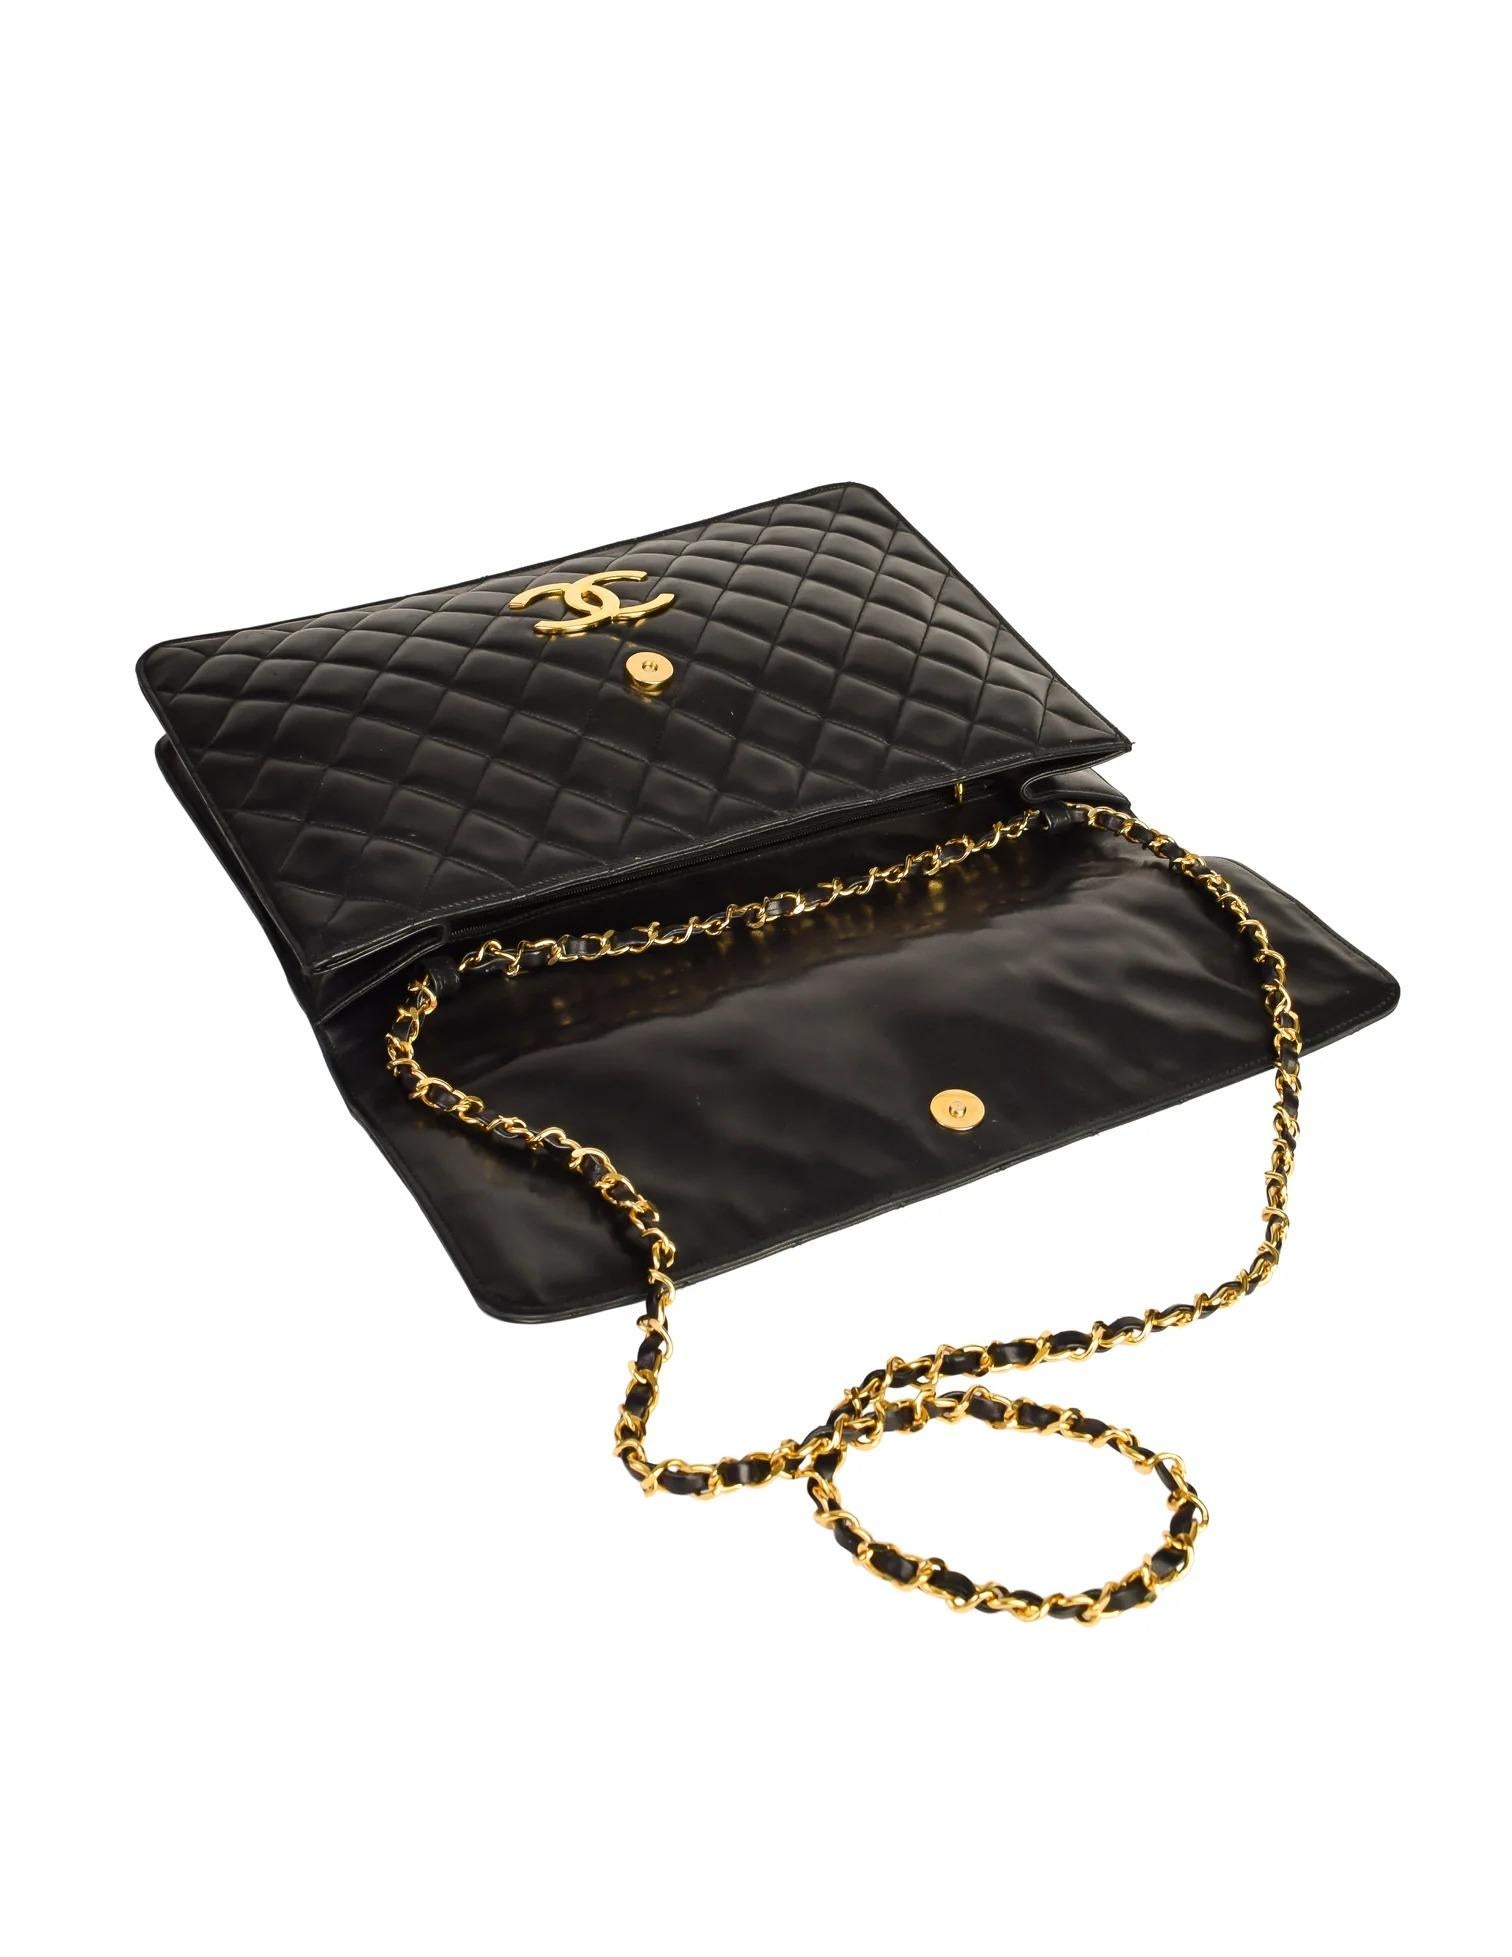 Chanel 1990 Rare Jumbo Maxi XL Vintage Classic Flap Giant Clutch Briefcase For Sale 7